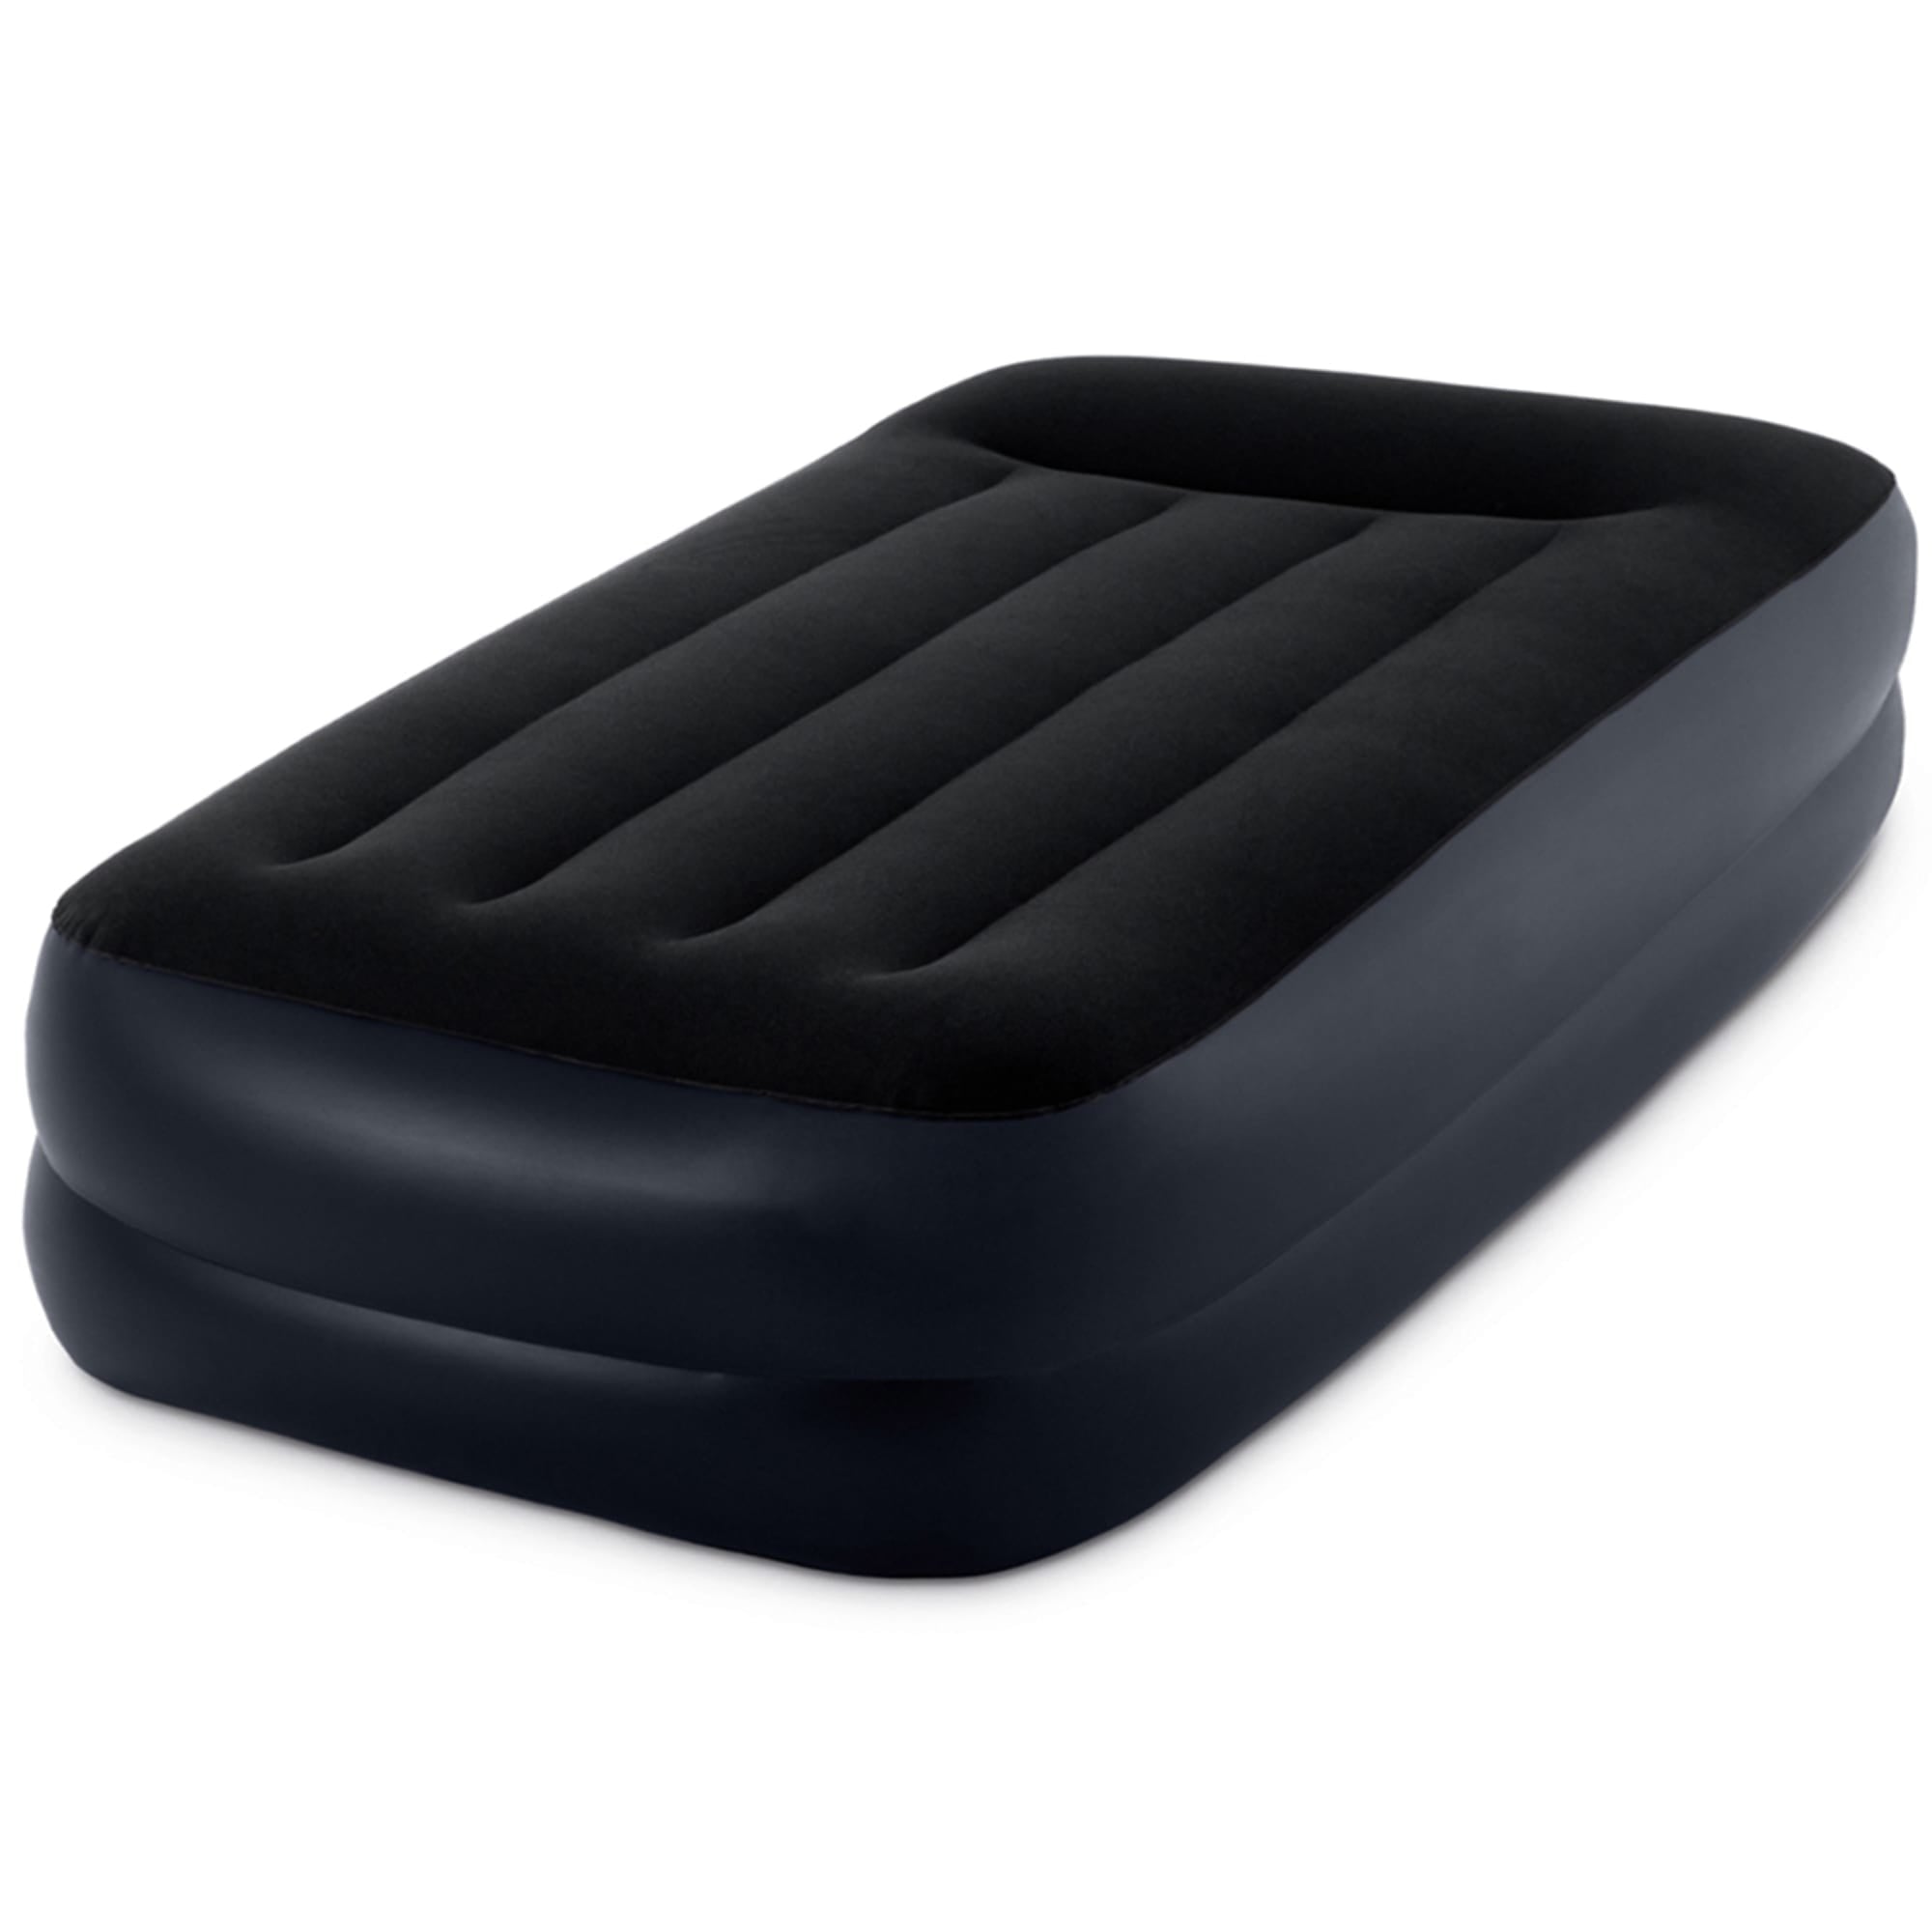 Intex Raised Twin Air Bed with Pillow Rest and Built In Pump $50 EACH, CASE PACK OF 3